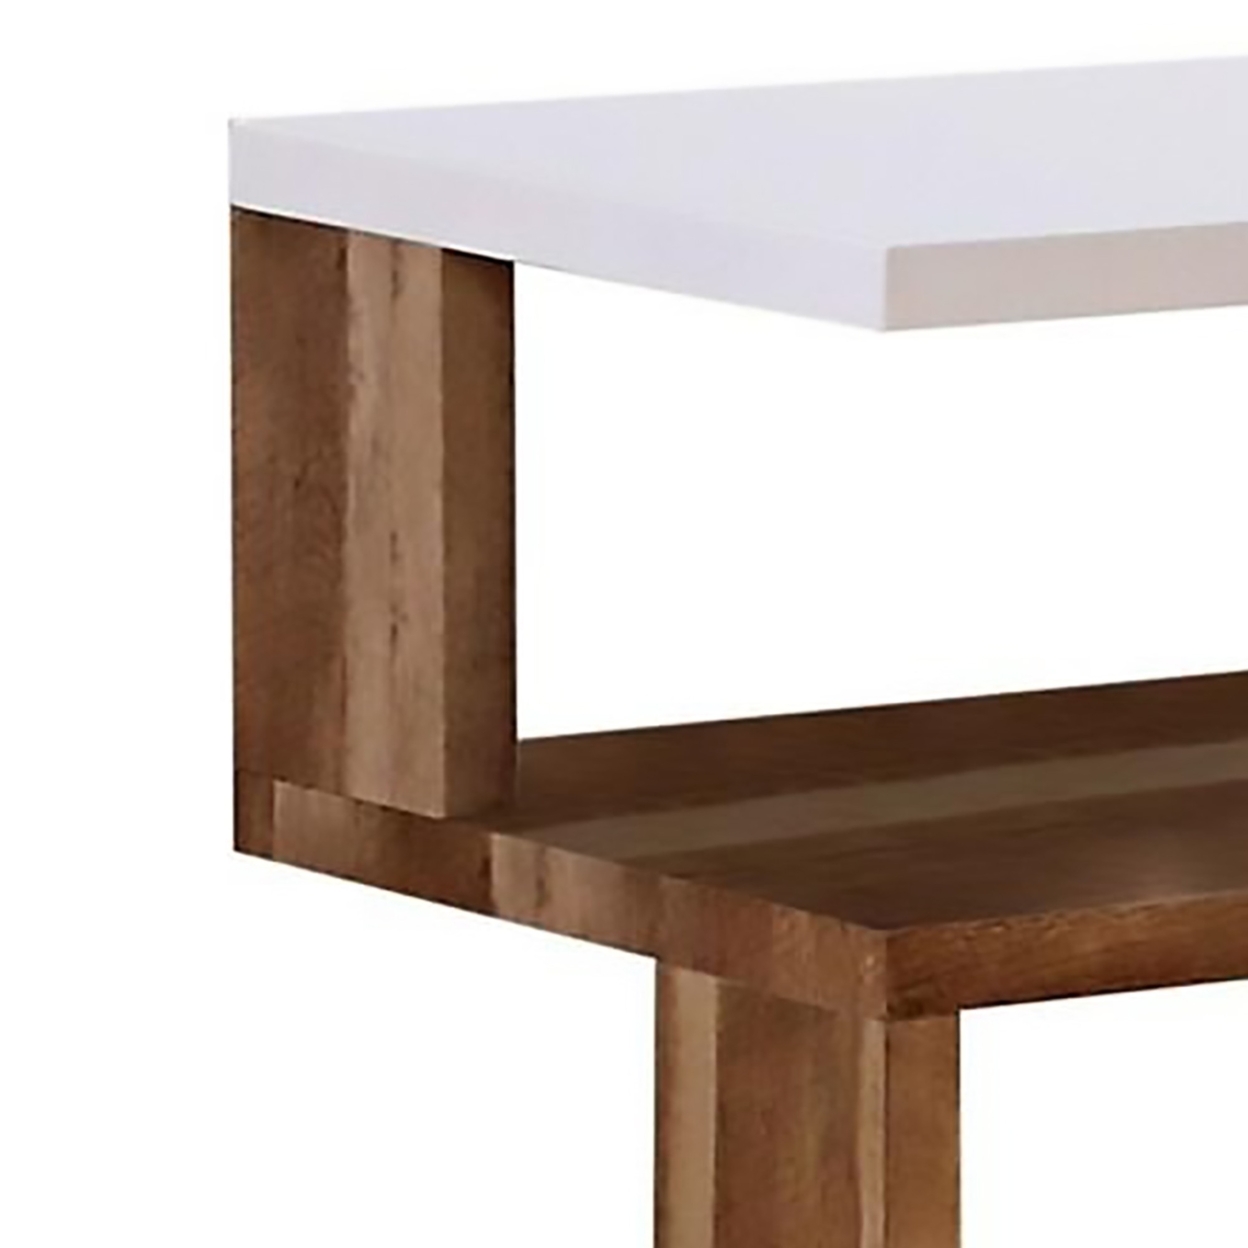 End Table With 2 Tier Shelves And Panel Legs, Brown And White- Saltoro Sherpi